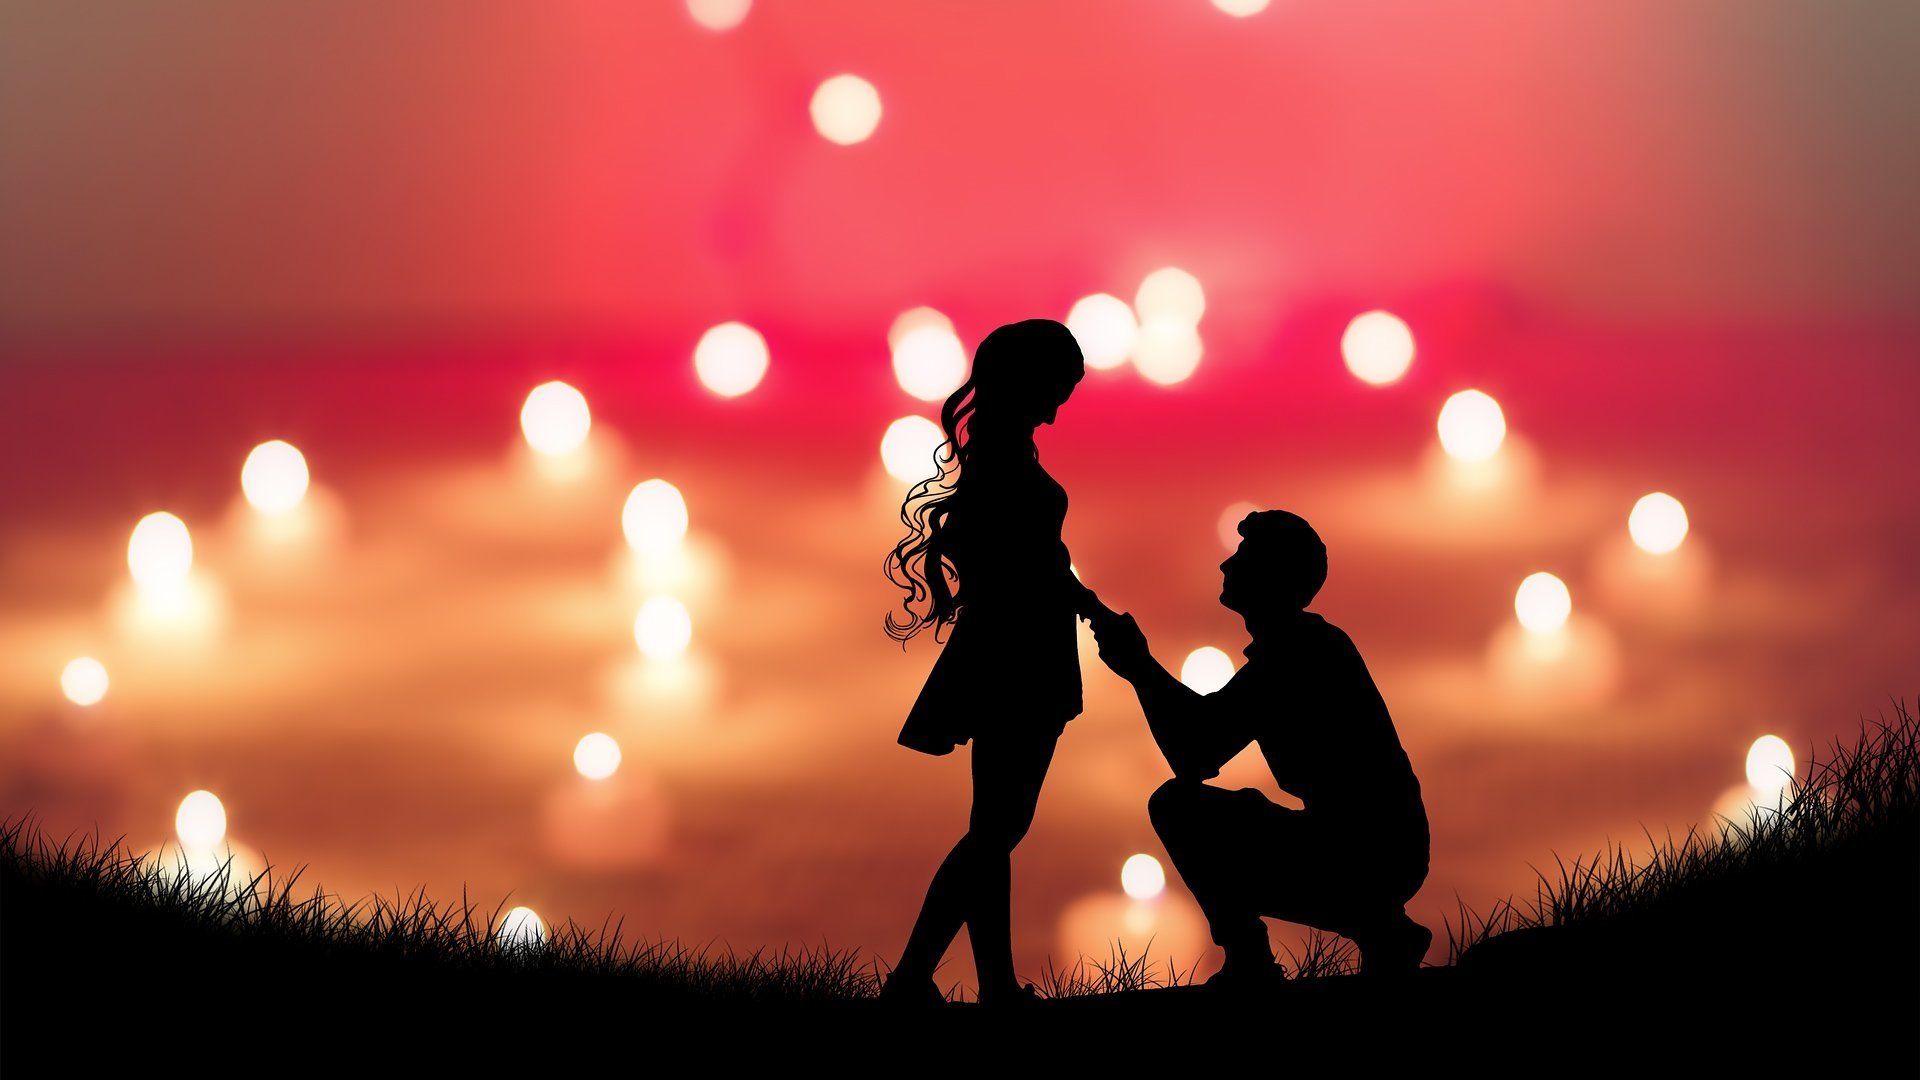 Tons of awesome romantic lovers wallpapers to download for free. 